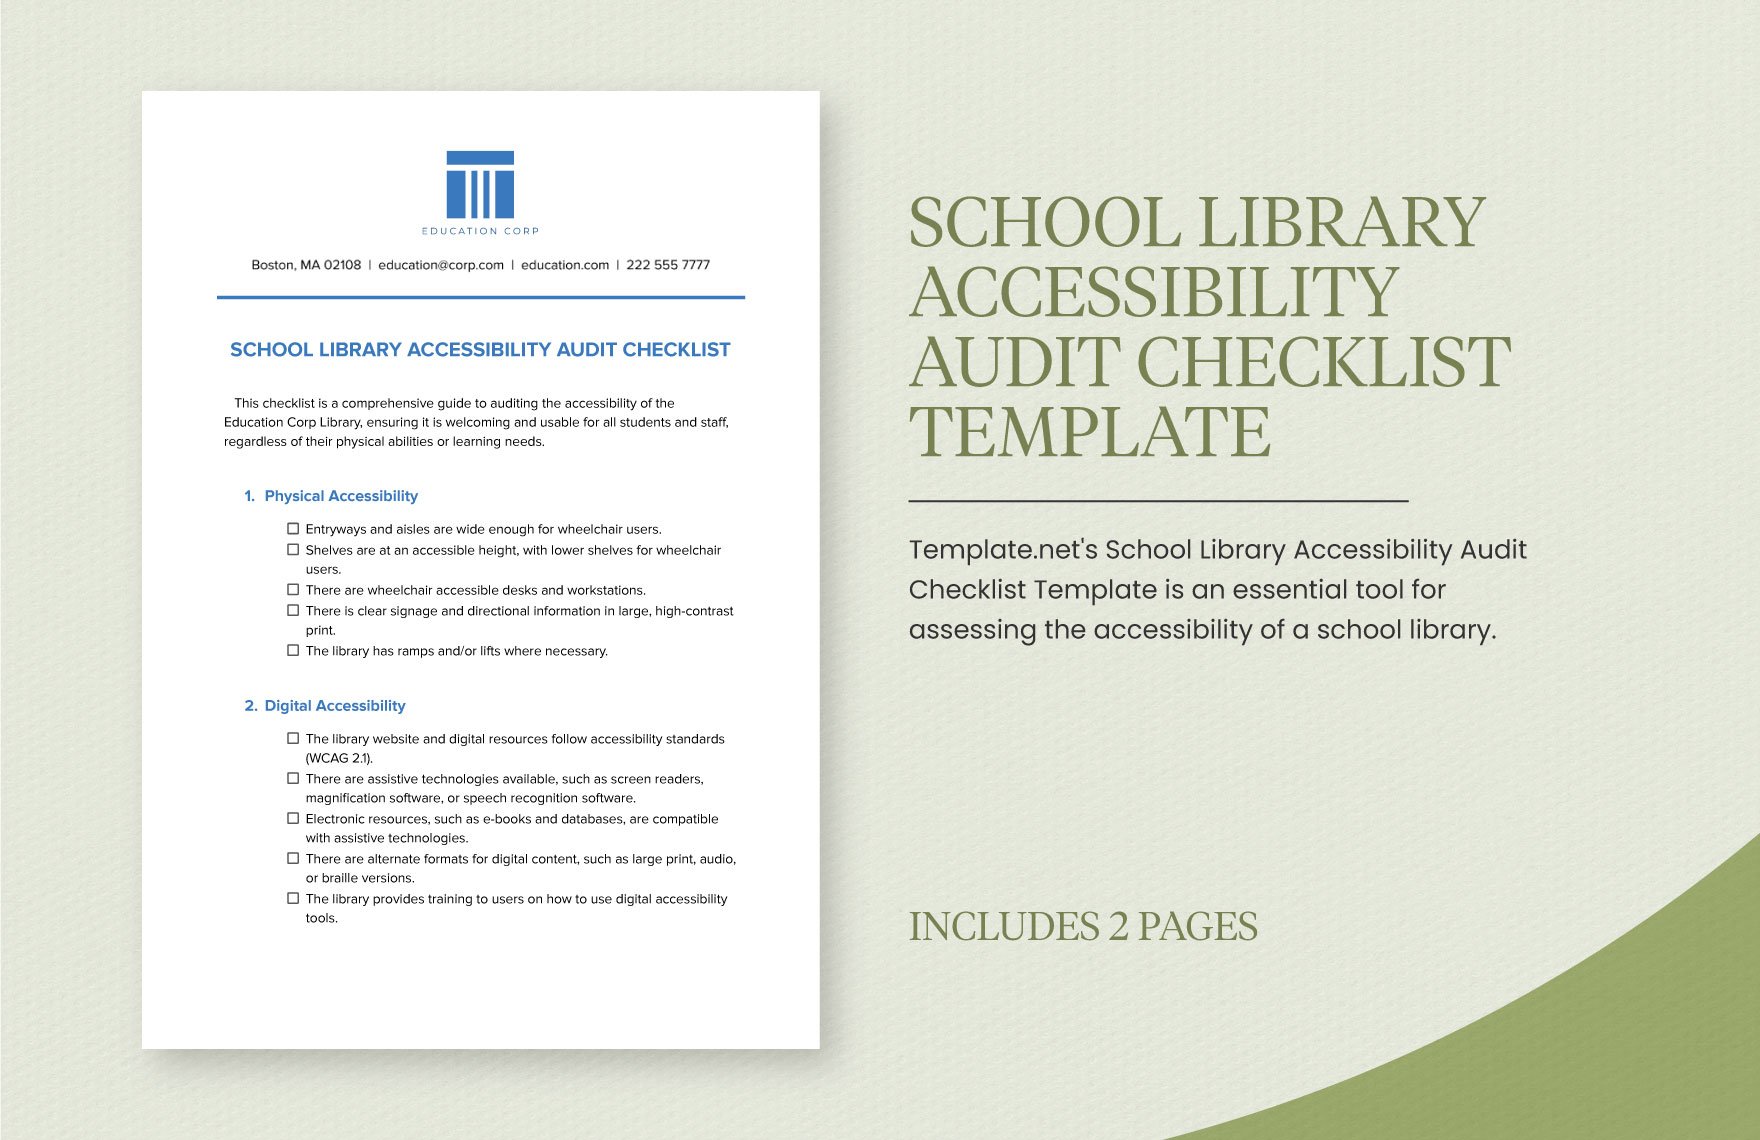 School Library Accessibility Audit Checklist Template